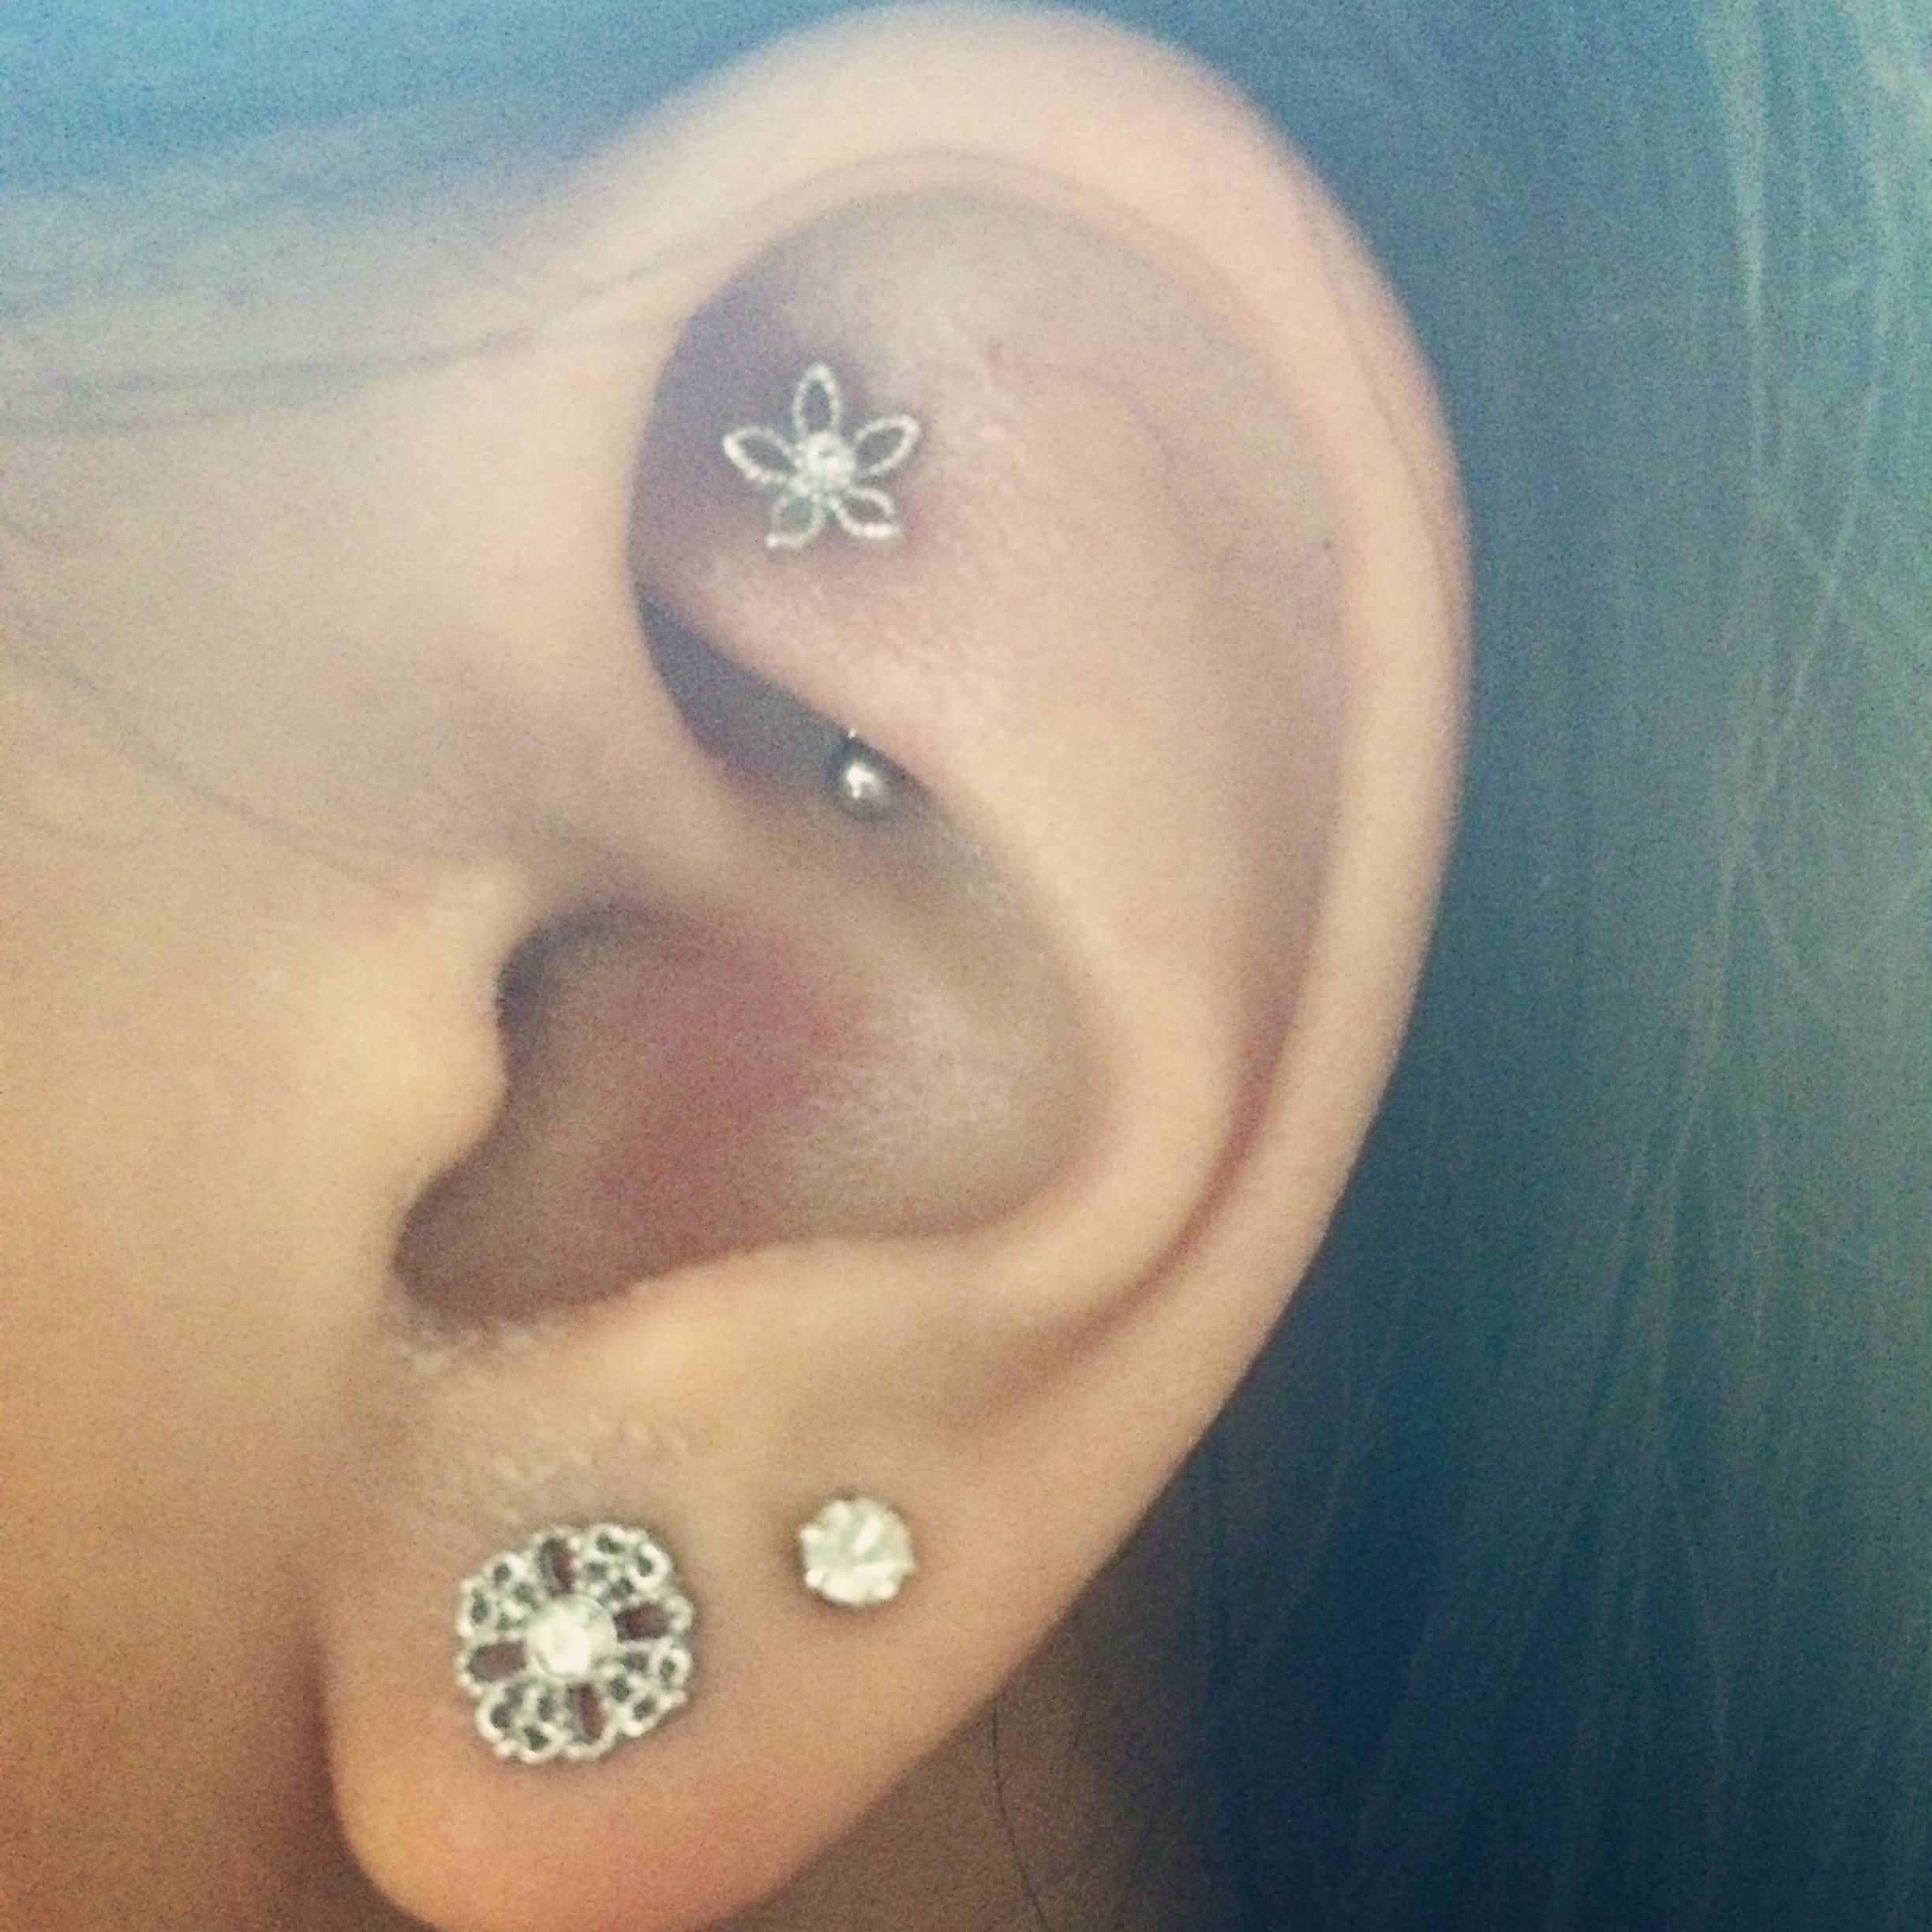 Dual Lobe And Flower Stud Rook Piercing For Girls